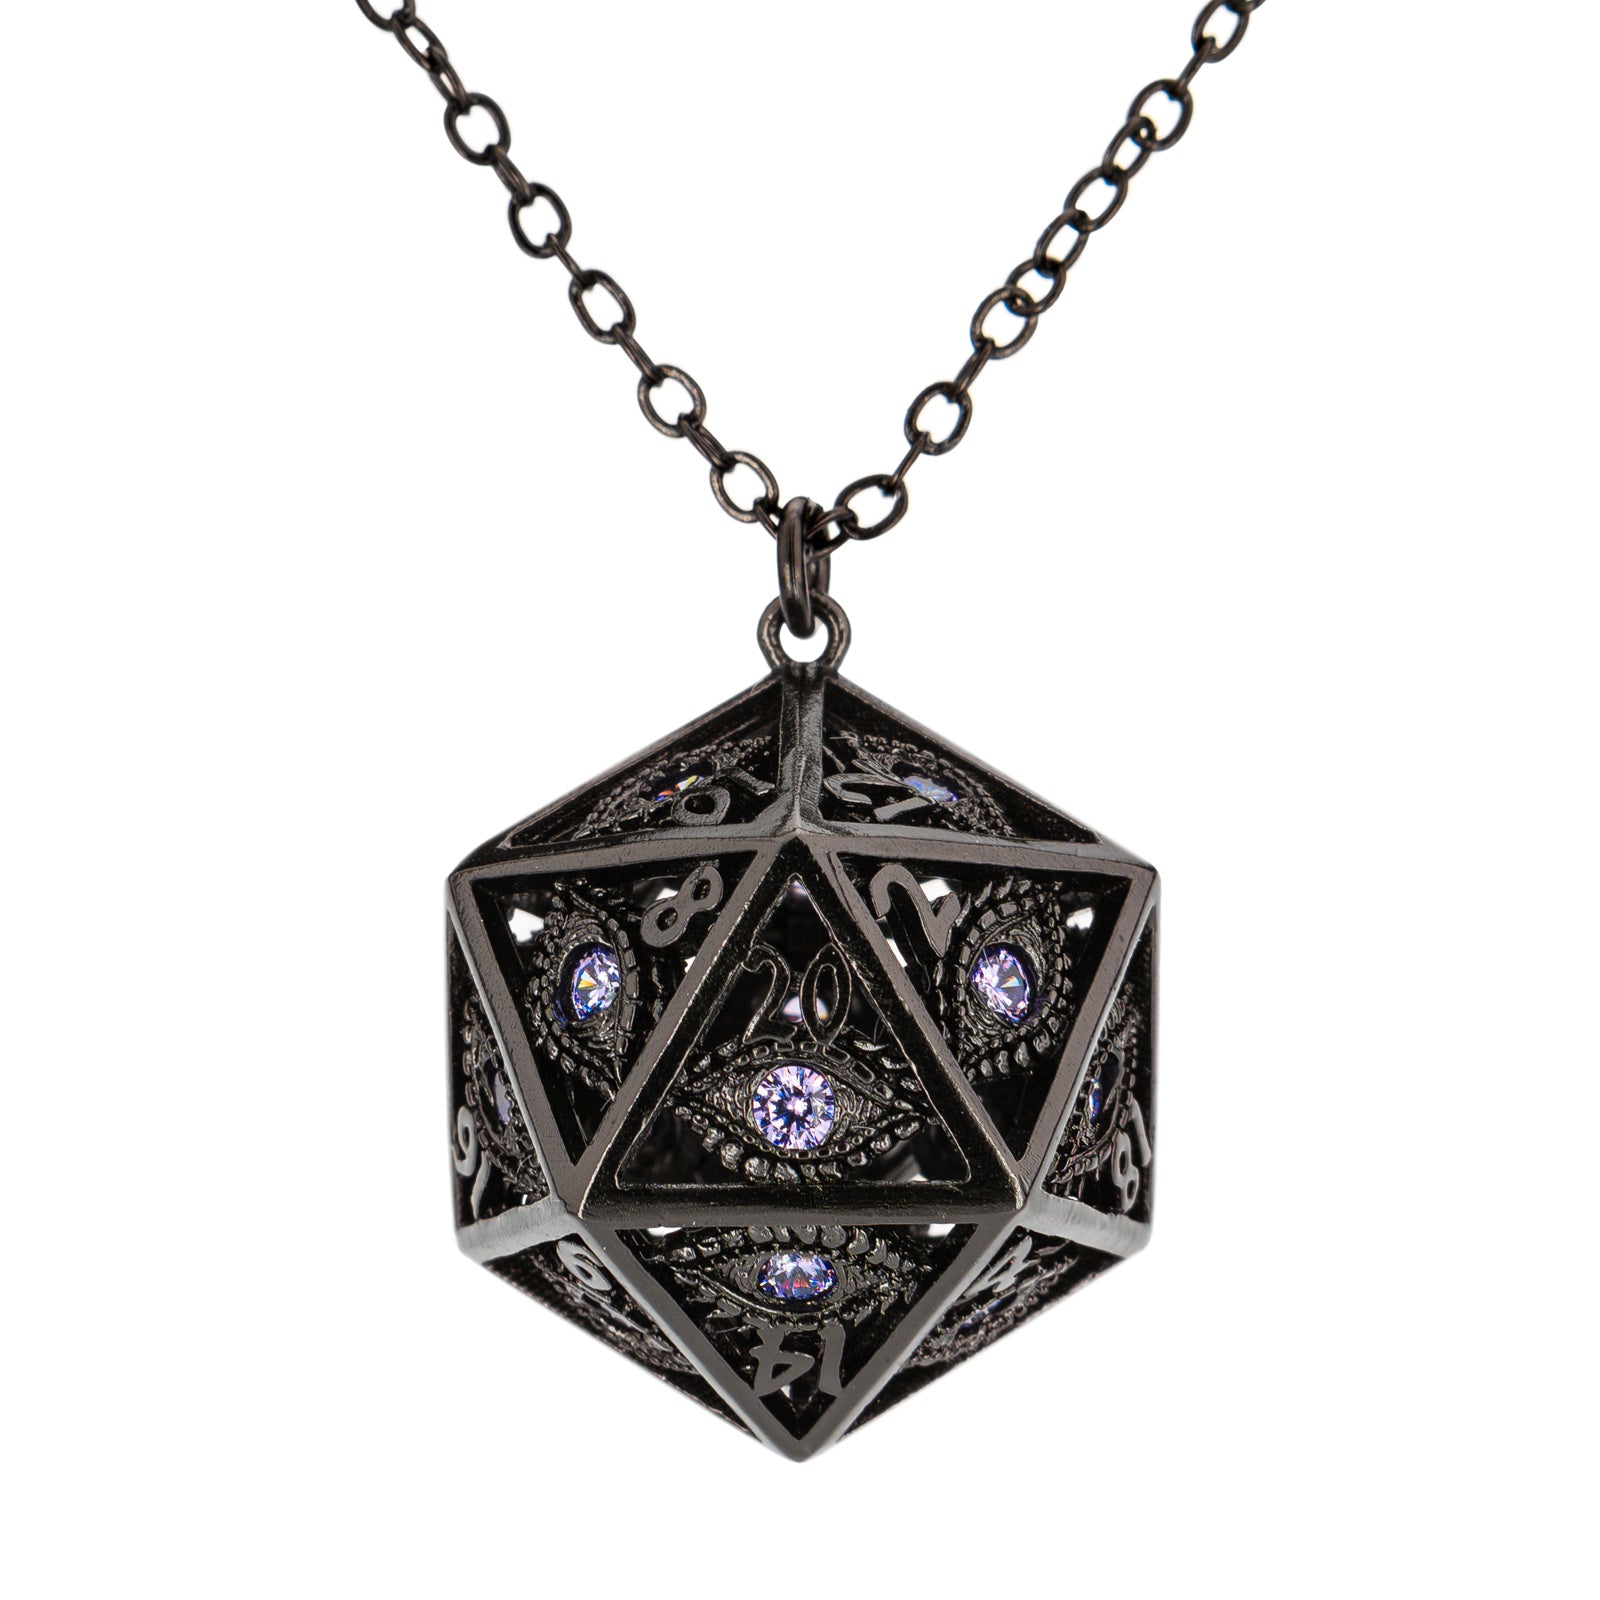 Dragon's Eye D20 Necklace - Gold with Ruby Red Gems, $34.99, Best Retro  Gaming Deals